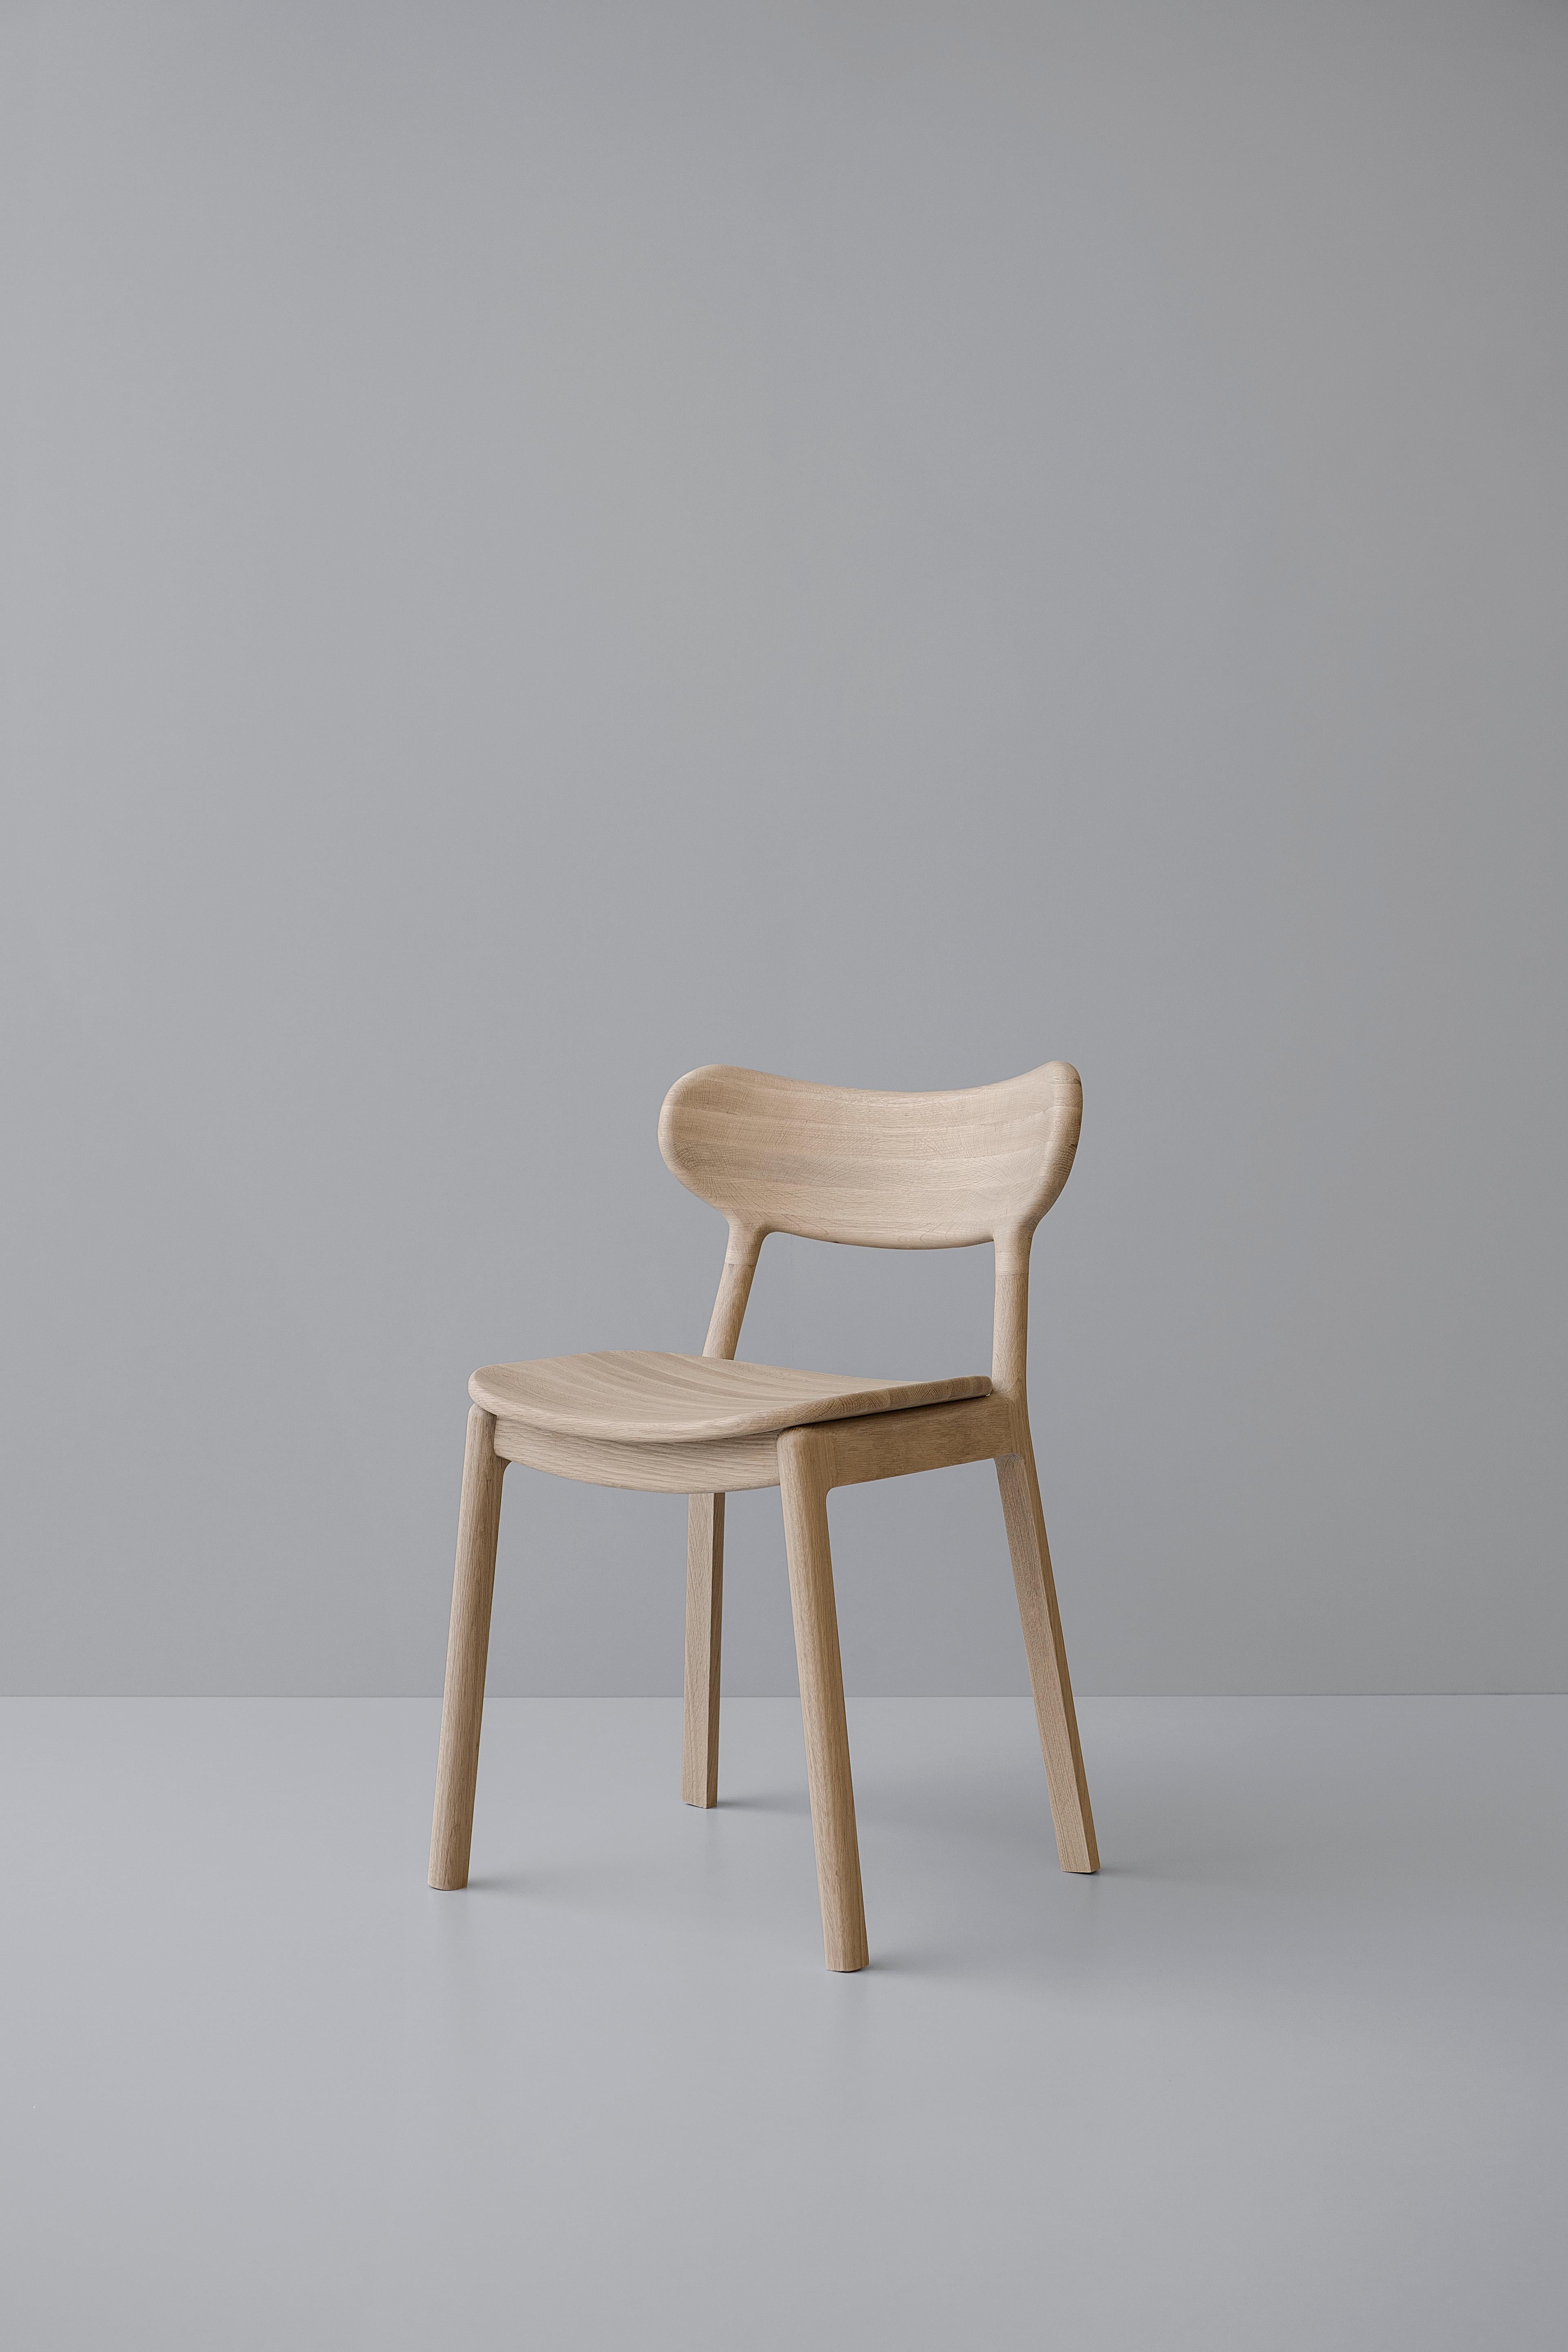 Trasiego dining chair by Arturo Verástegui
Dimensions: D 47 x W 53 x H 75 cm
Materials: oak wood.

Natural white oak low dining chair.

Sebastián Angeles is an Industrial Designer originally from Mexico City who graduated from the Anáhuac